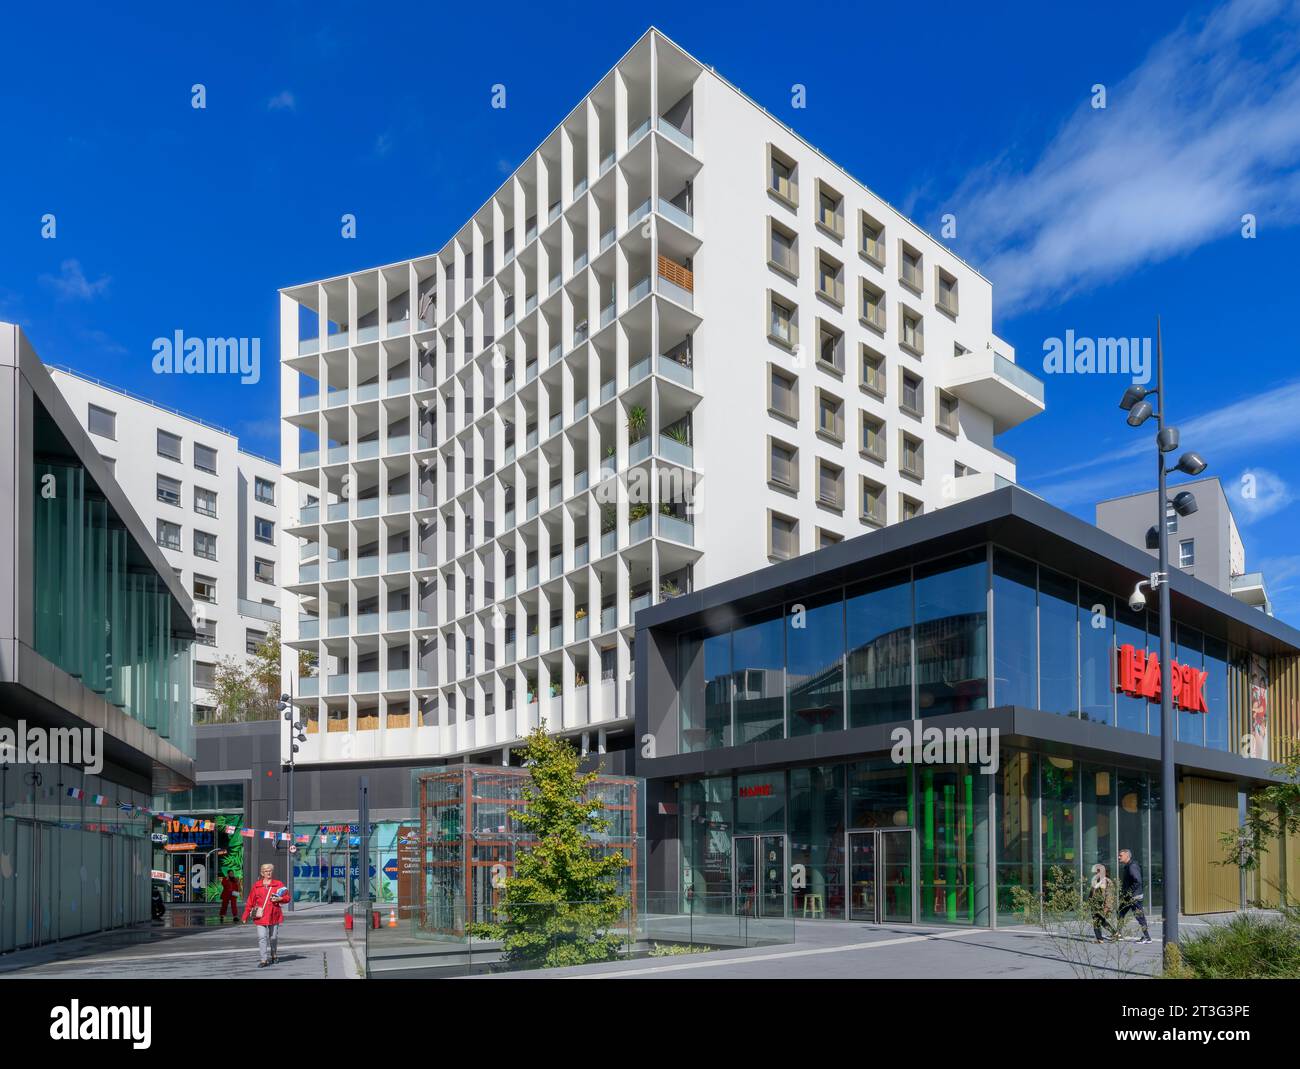 Smart modern apartments in a new development in northern Bordeaux called Ginkgo.With new shops, cafes and the Hapik rock climbing gym. Stock Photo